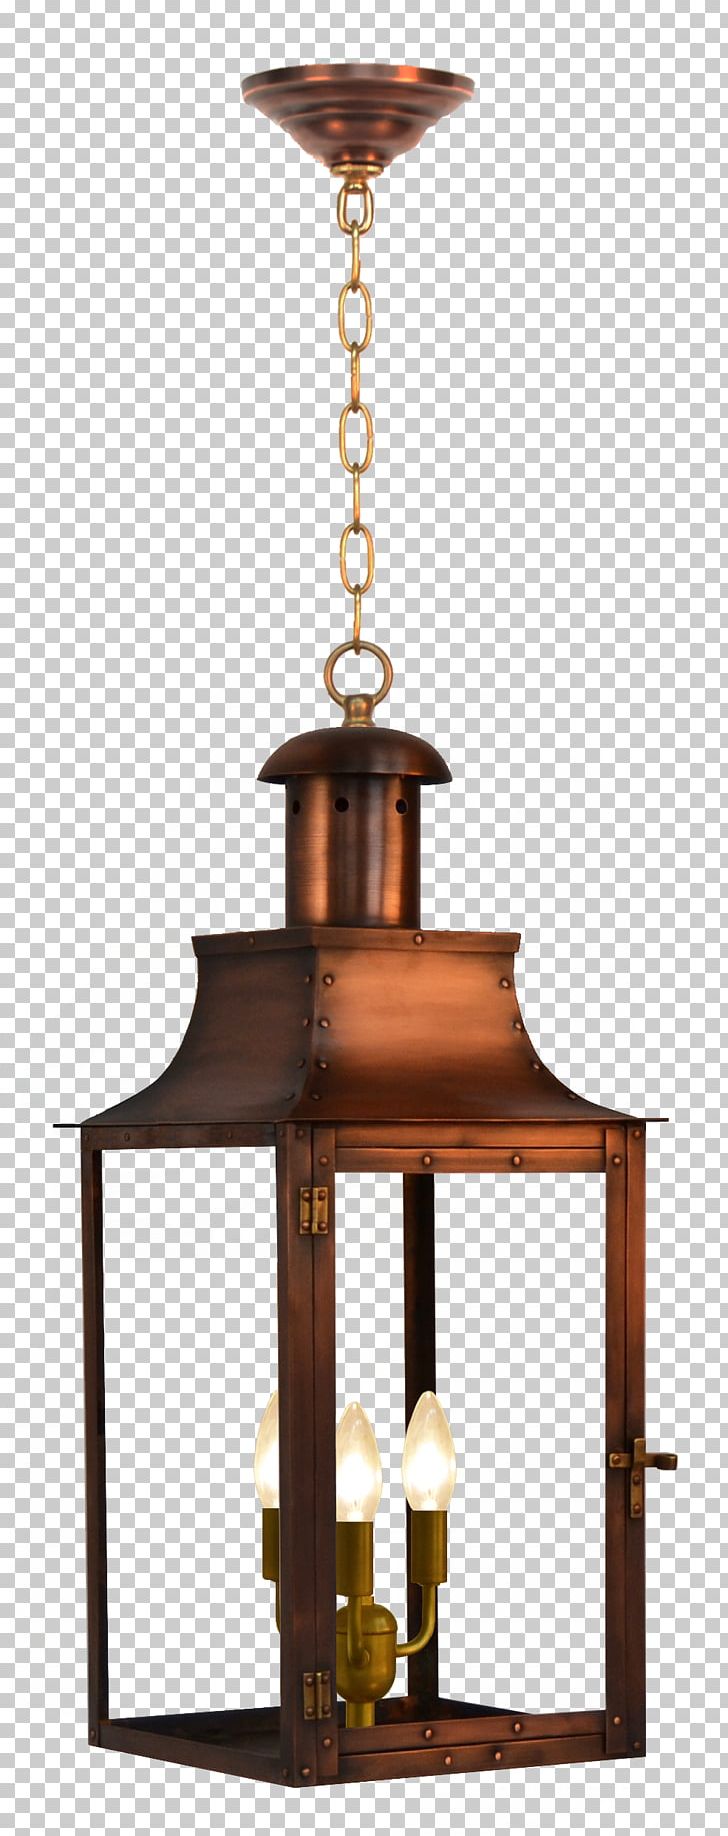 Incandescent Light Bulb Lantern Lamp Coppersmith PNG, Clipart, Candle, Ceiling Fixture, Chandelier, Coppersmith, Electric Free PNG Download